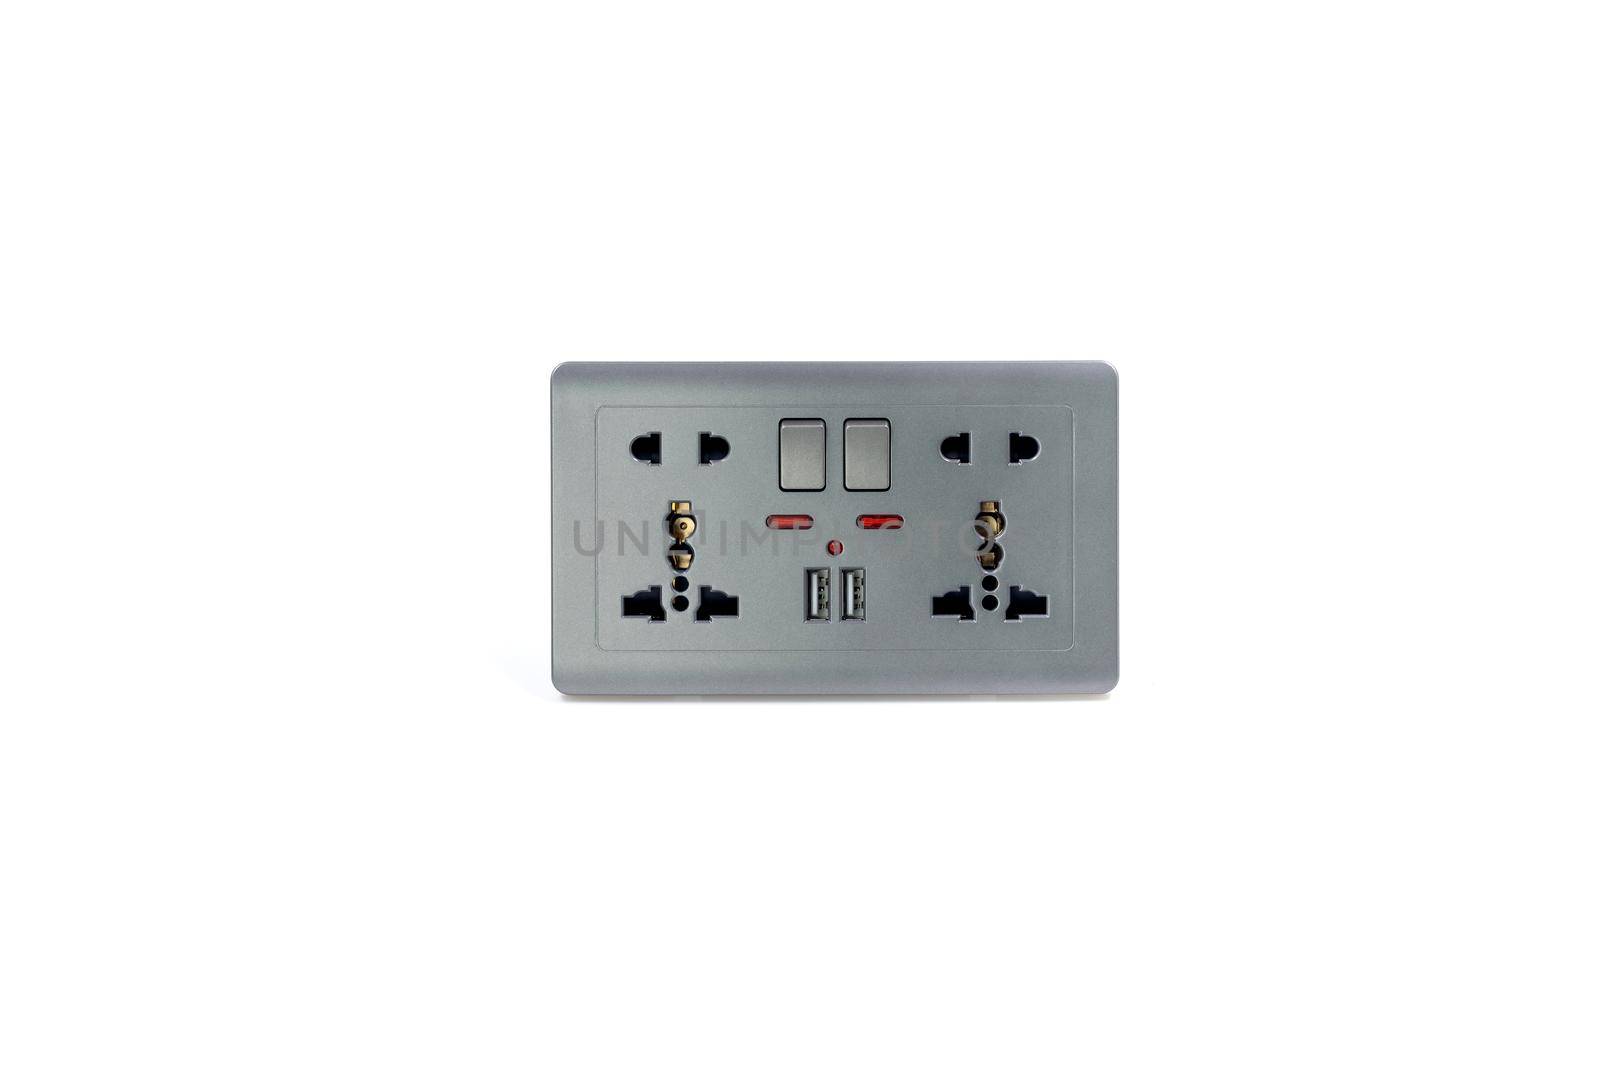 Universal wall outlet AC power plug with USB 5.0V DC output socket for charger isolated on white background.